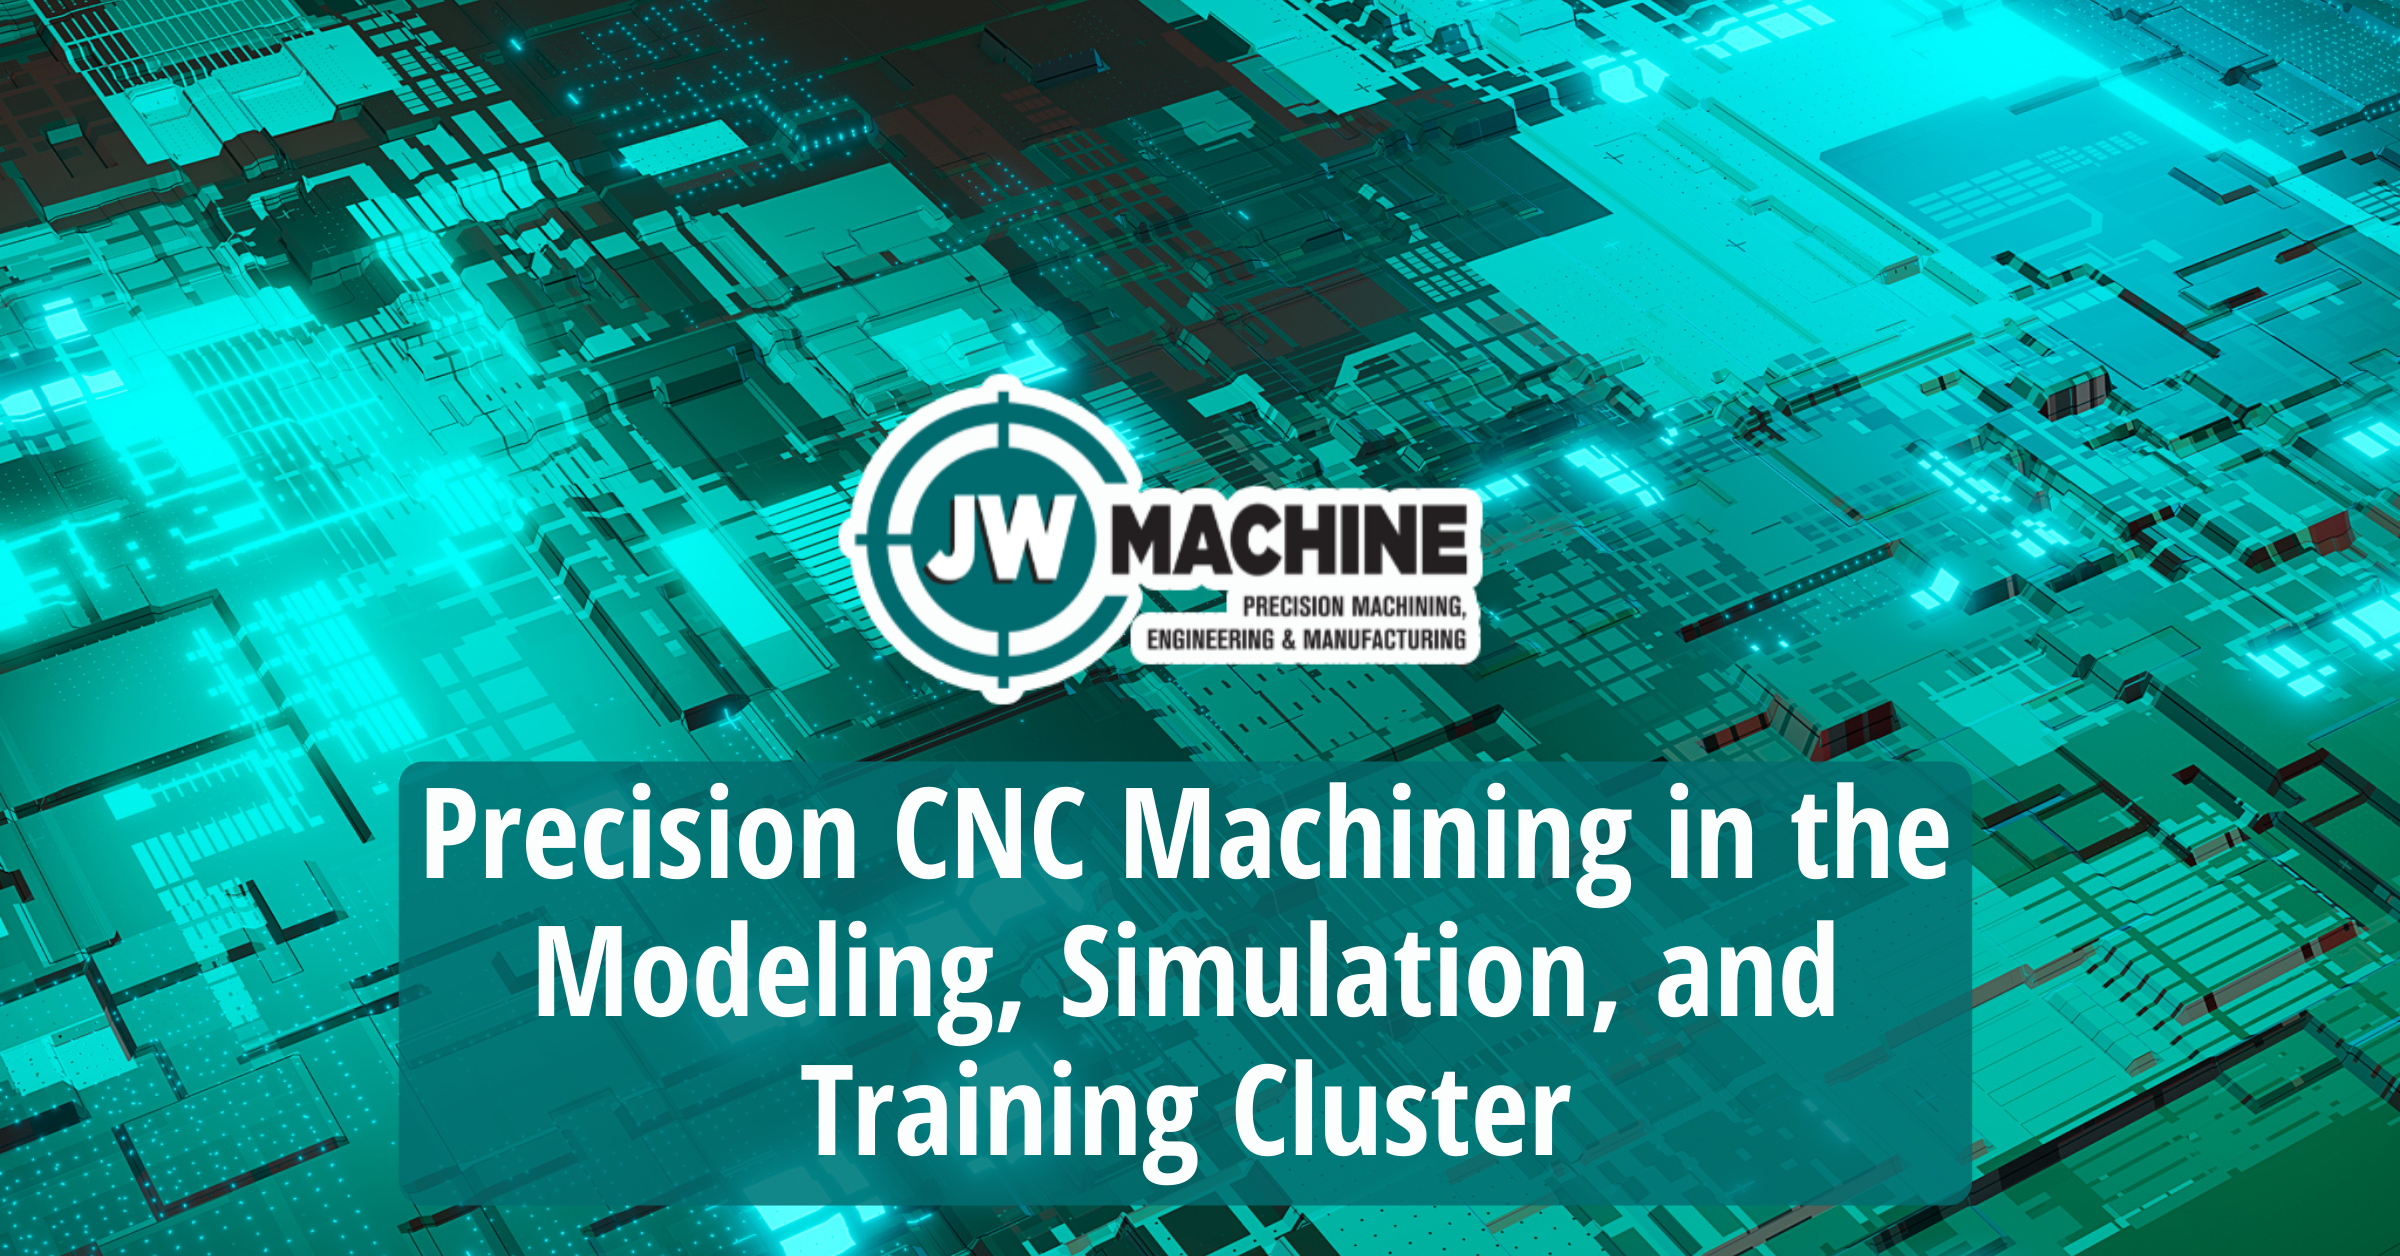 Precision CNC Machining in the Modeling, Simulation, and Training Cluster